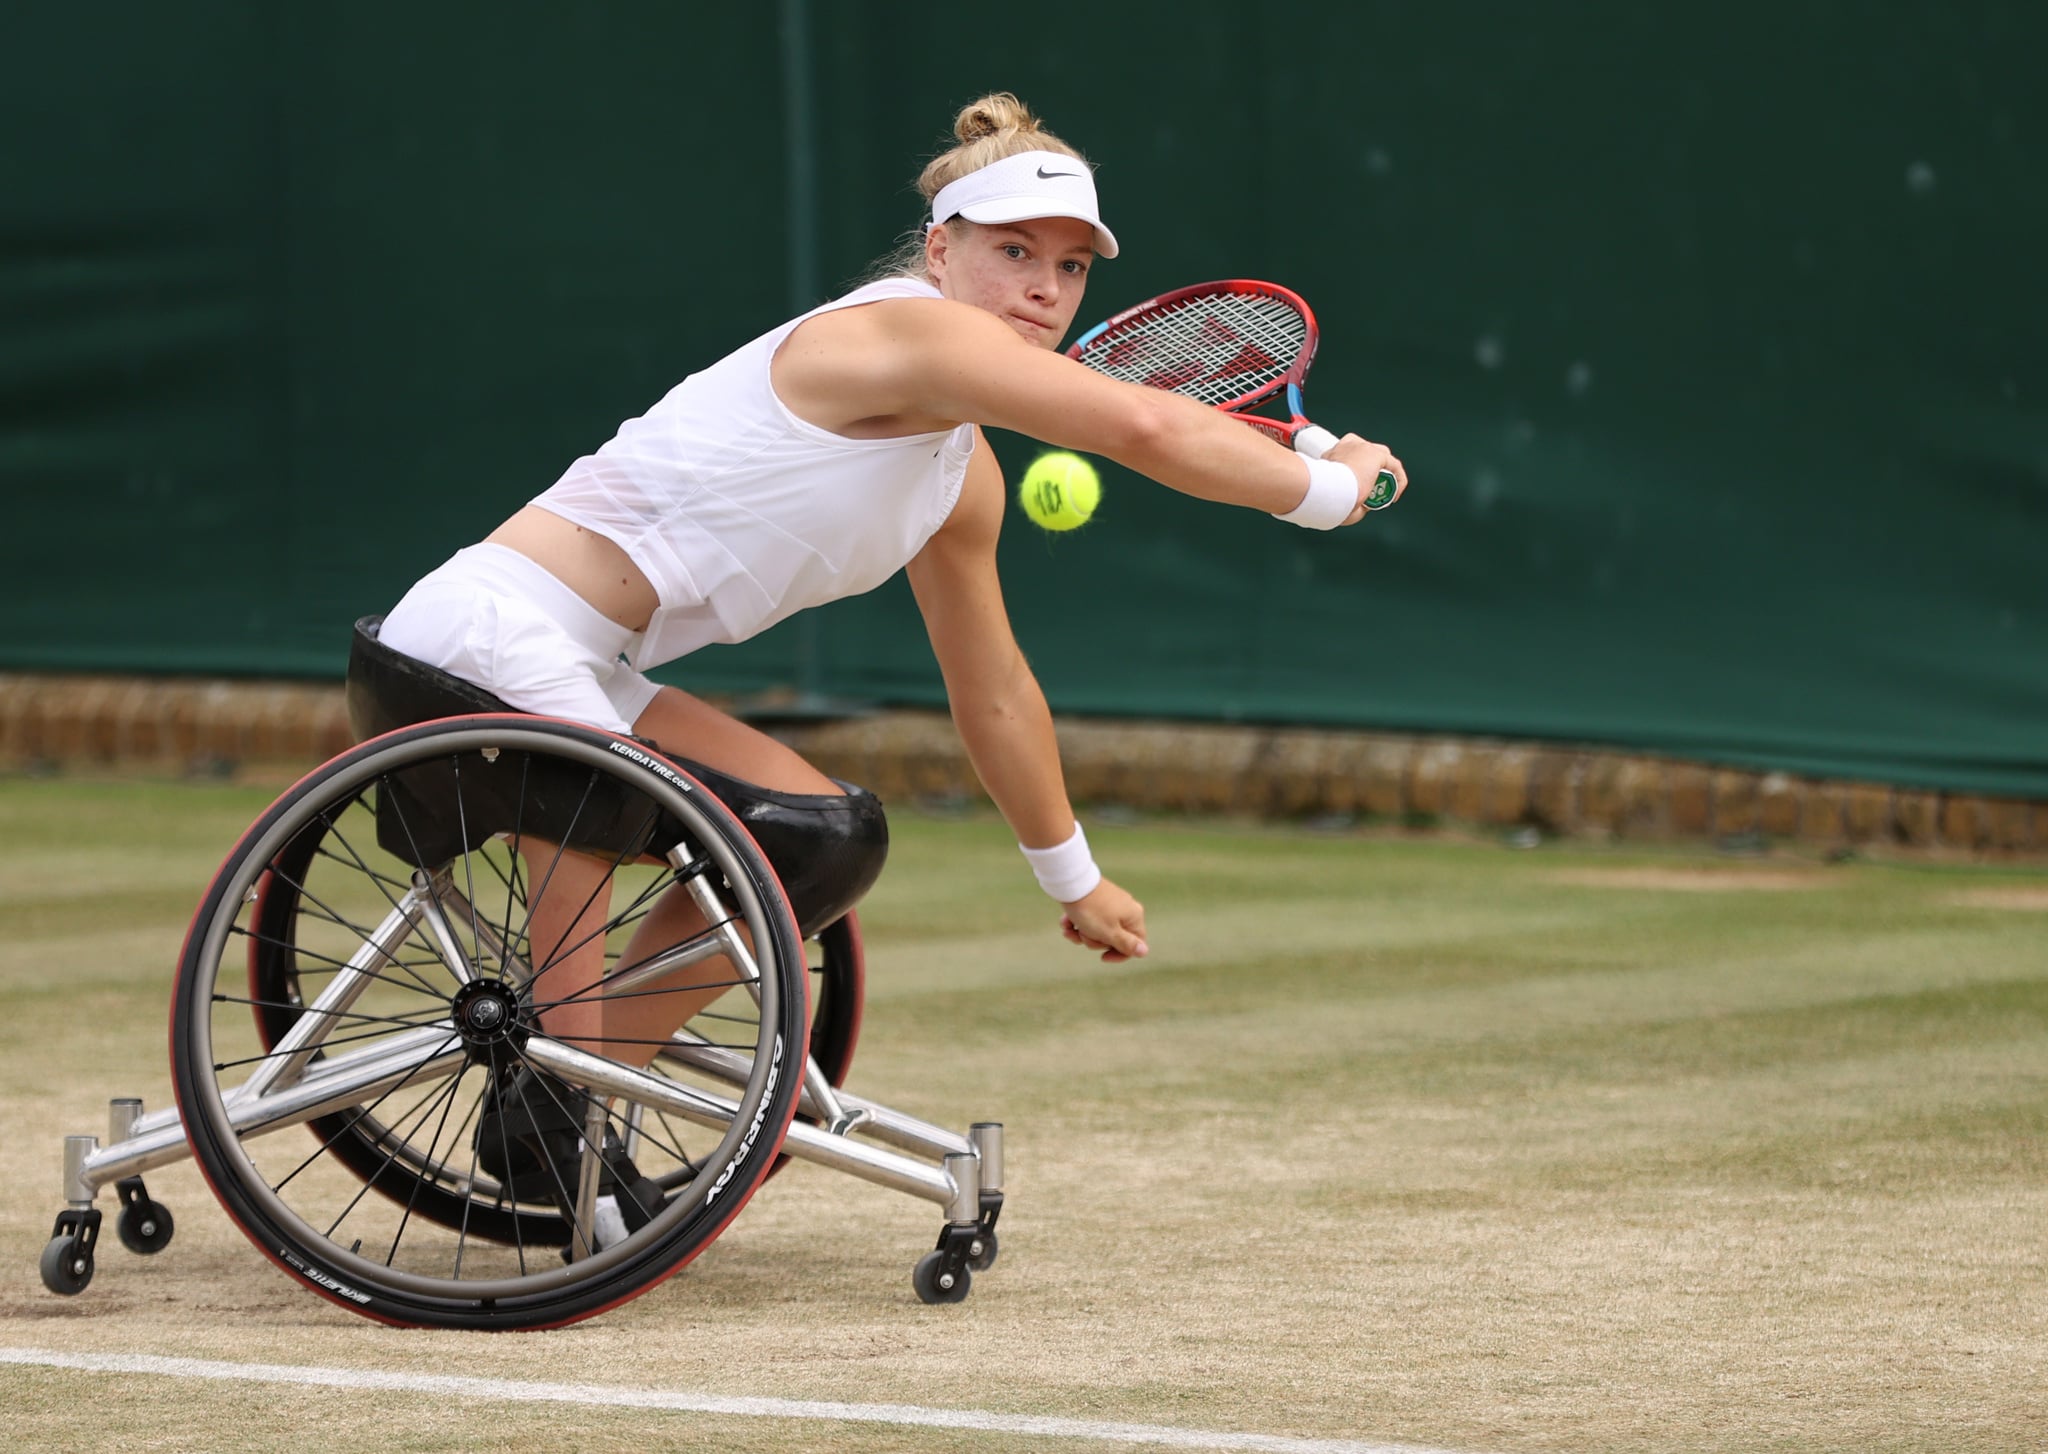 LONDON, ENGLAND - JULY 08: Diede De Groot of The Netherlands stretches to play a backhand in her Ladies' Wheelchair Singles Quarter-Final match against Lucy Shuker of Great Britain on Day Ten of The Championships - Wimbledon 2021 at All England Lawn Tennis and Croquet Club on July 08, 2021 in London, England. (Photo by Clive Brunskill/Getty Images)